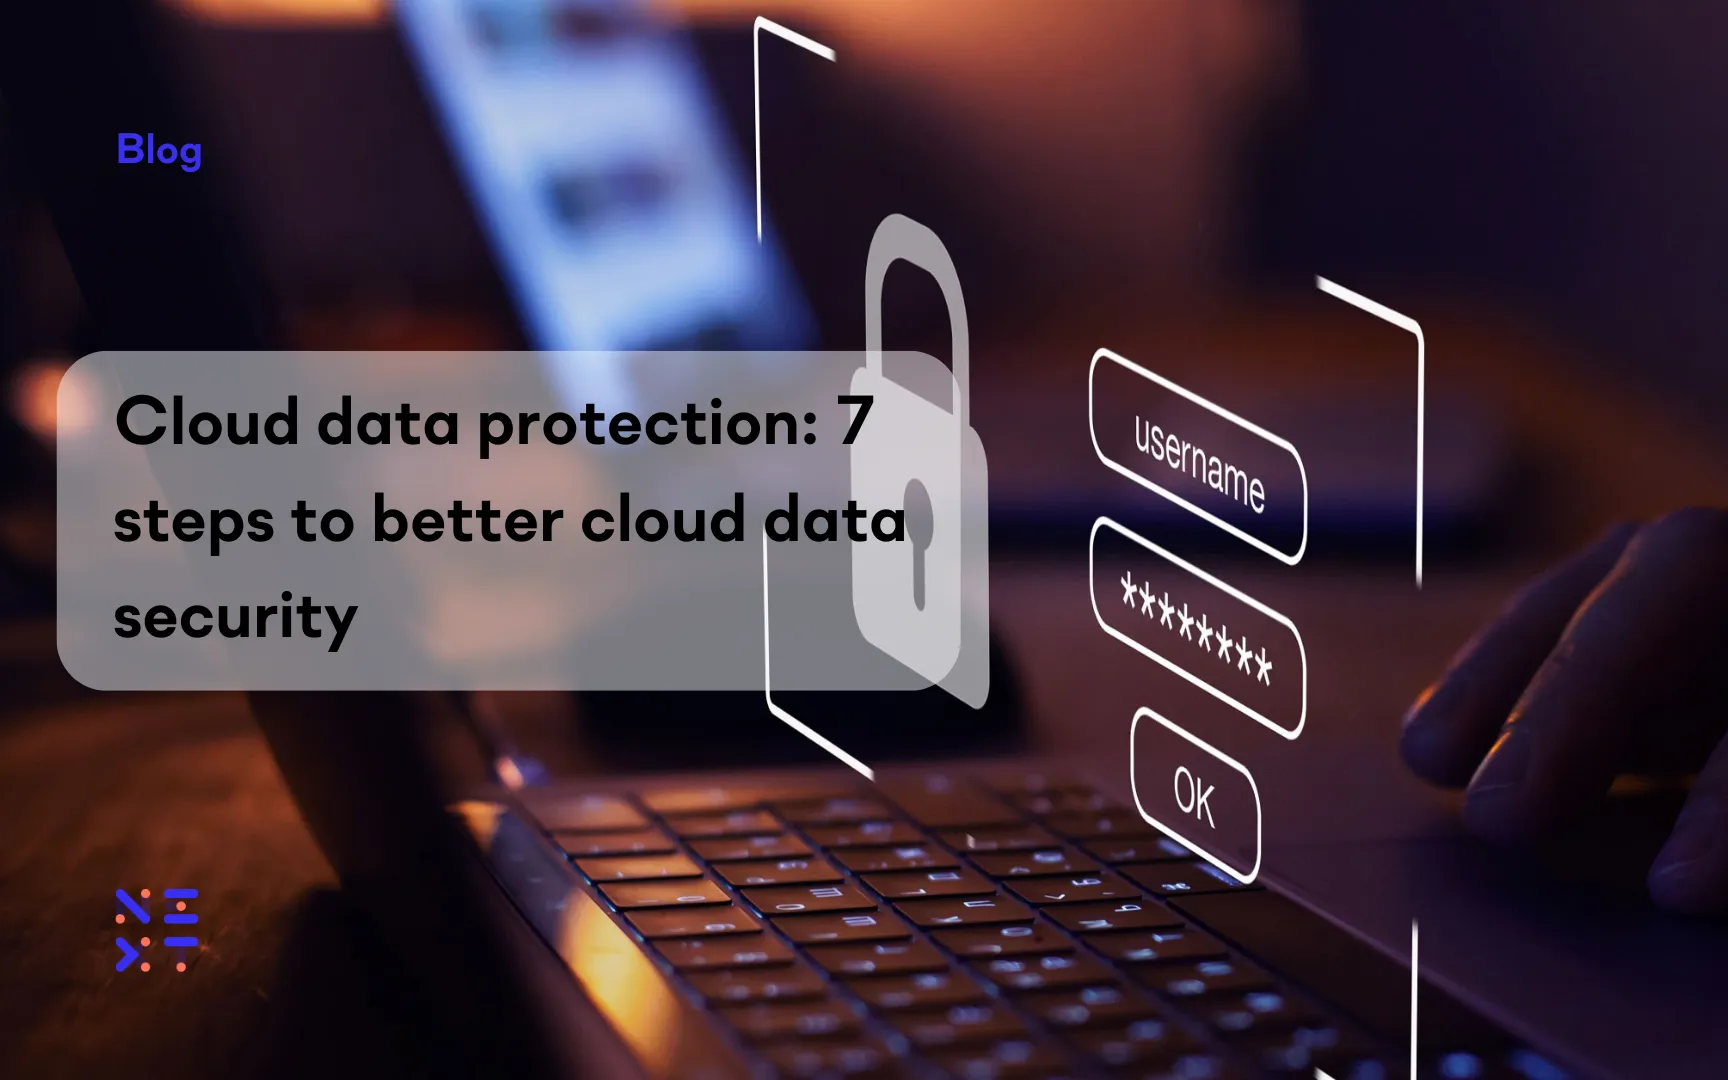 Cloud data protection: 7 steps for better security | Next DLP